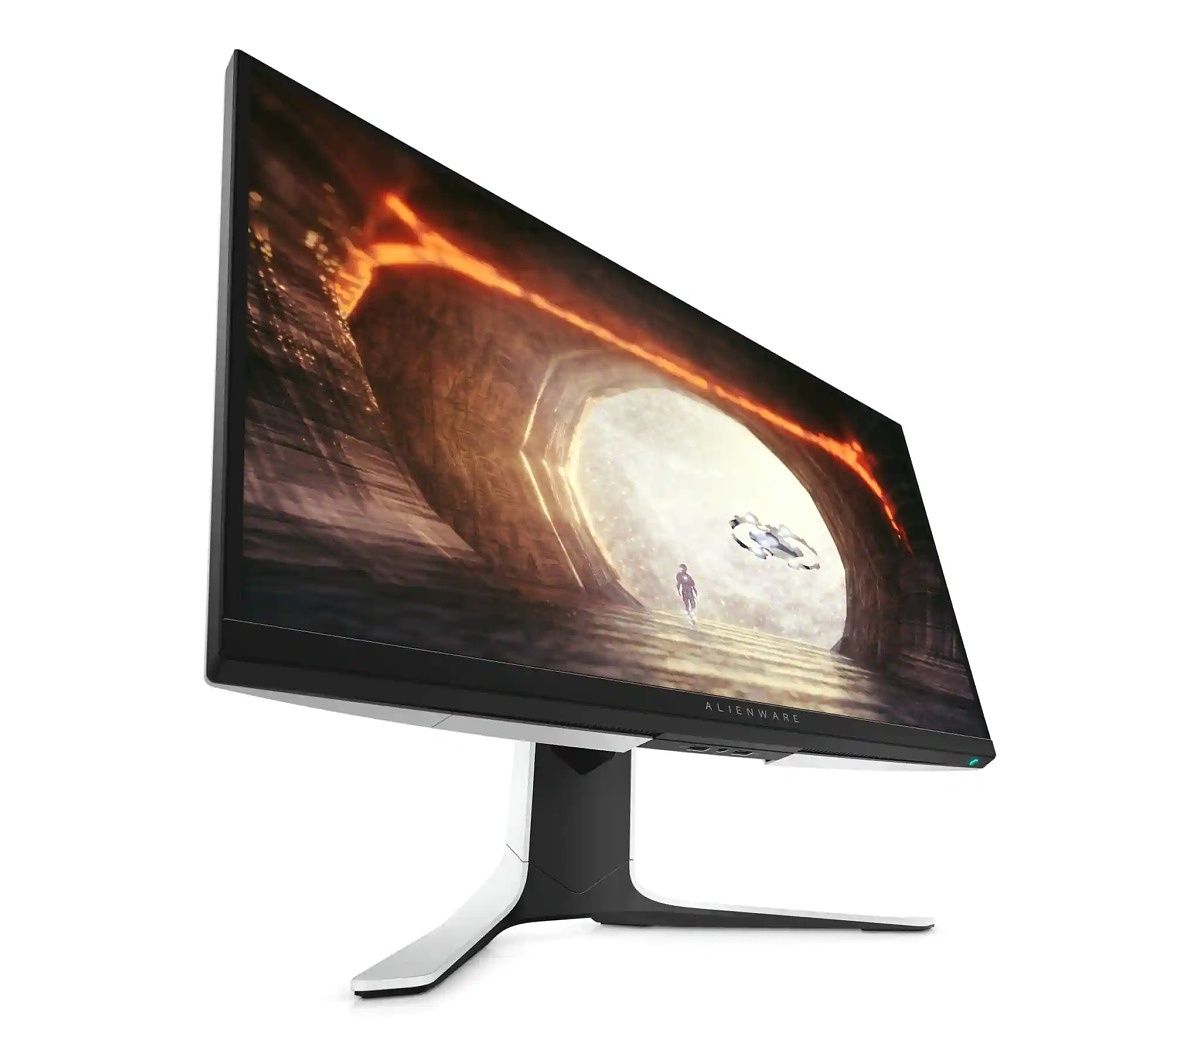 If you want to make the most of your GPU in games, a high-refresh rate monitor is important. The Dell Alienware 27 has Full HD resolution and supports refresh rates of up to 240Hz, as well as AMD FreeSync and Nvidia G-Sync.